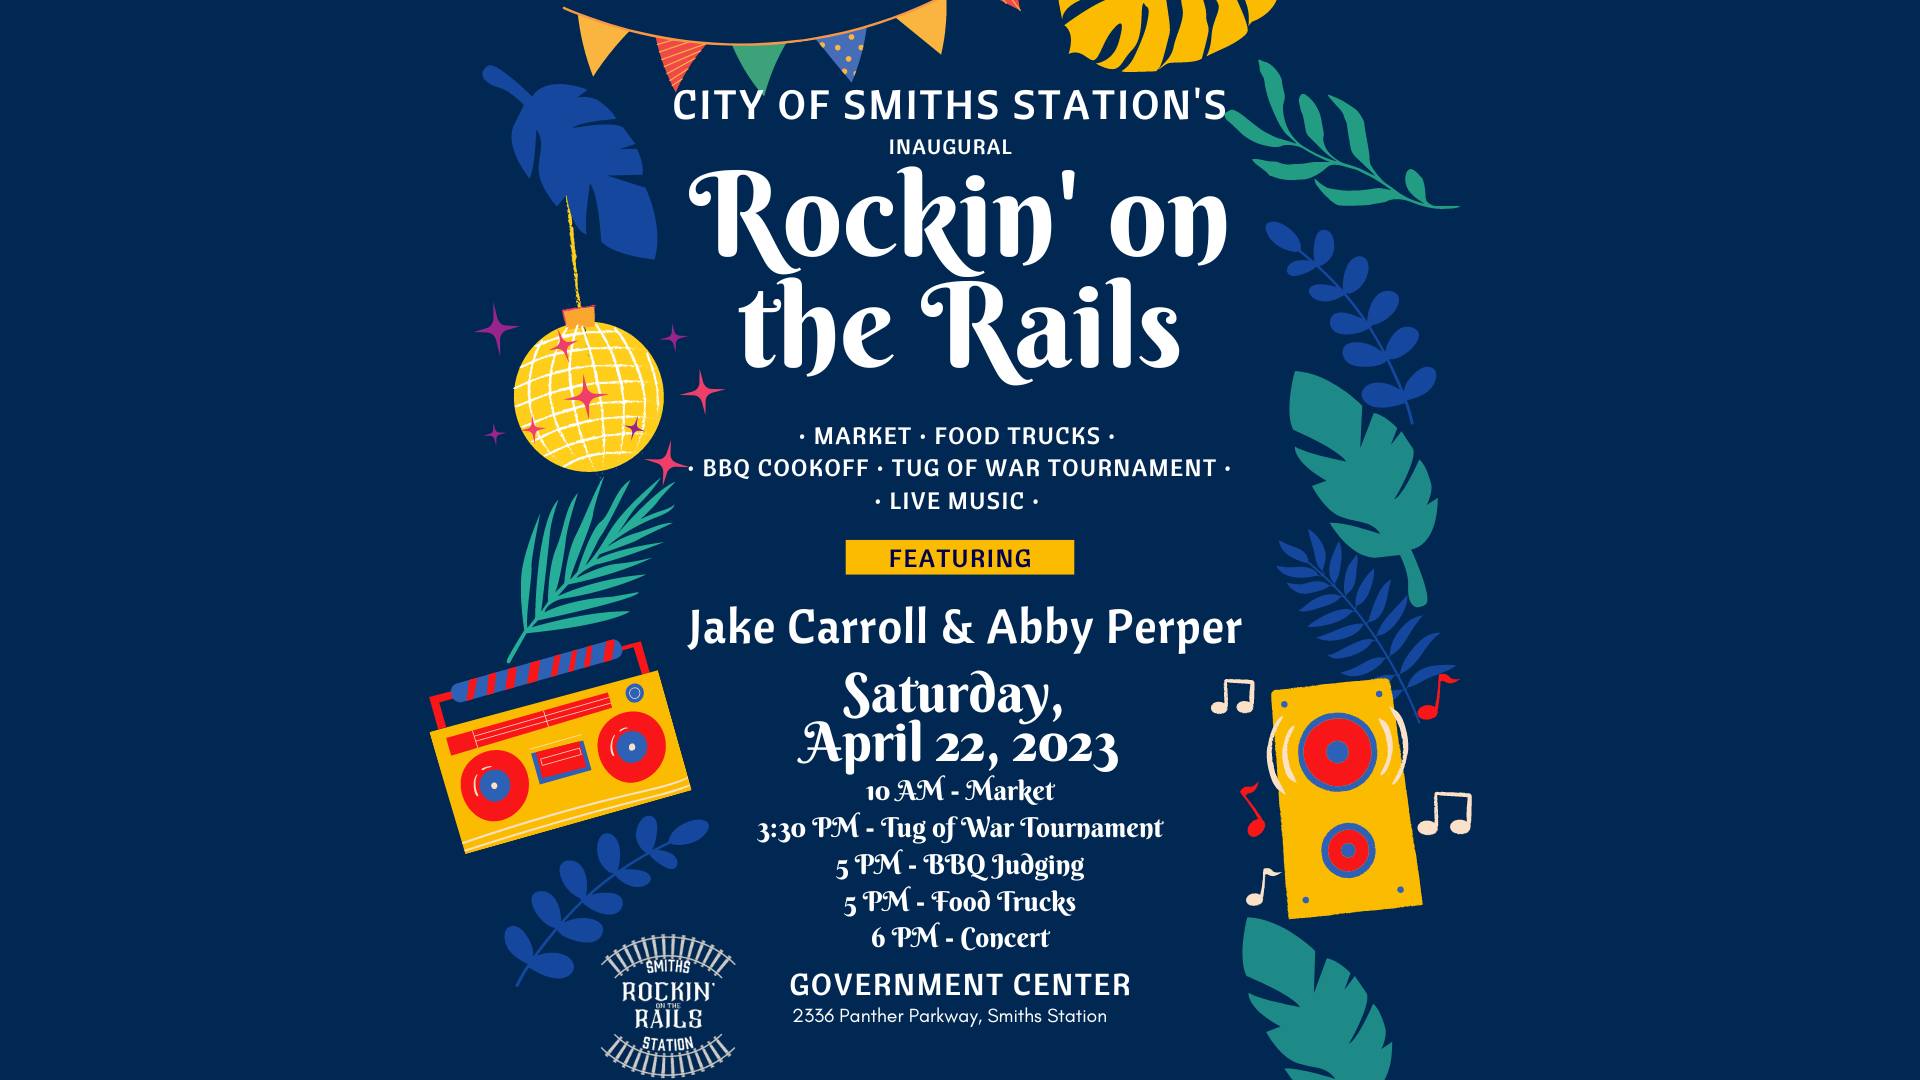 City of Smiths Station Gearing Up for Inaugural ‘Rockin’ on the Rails’